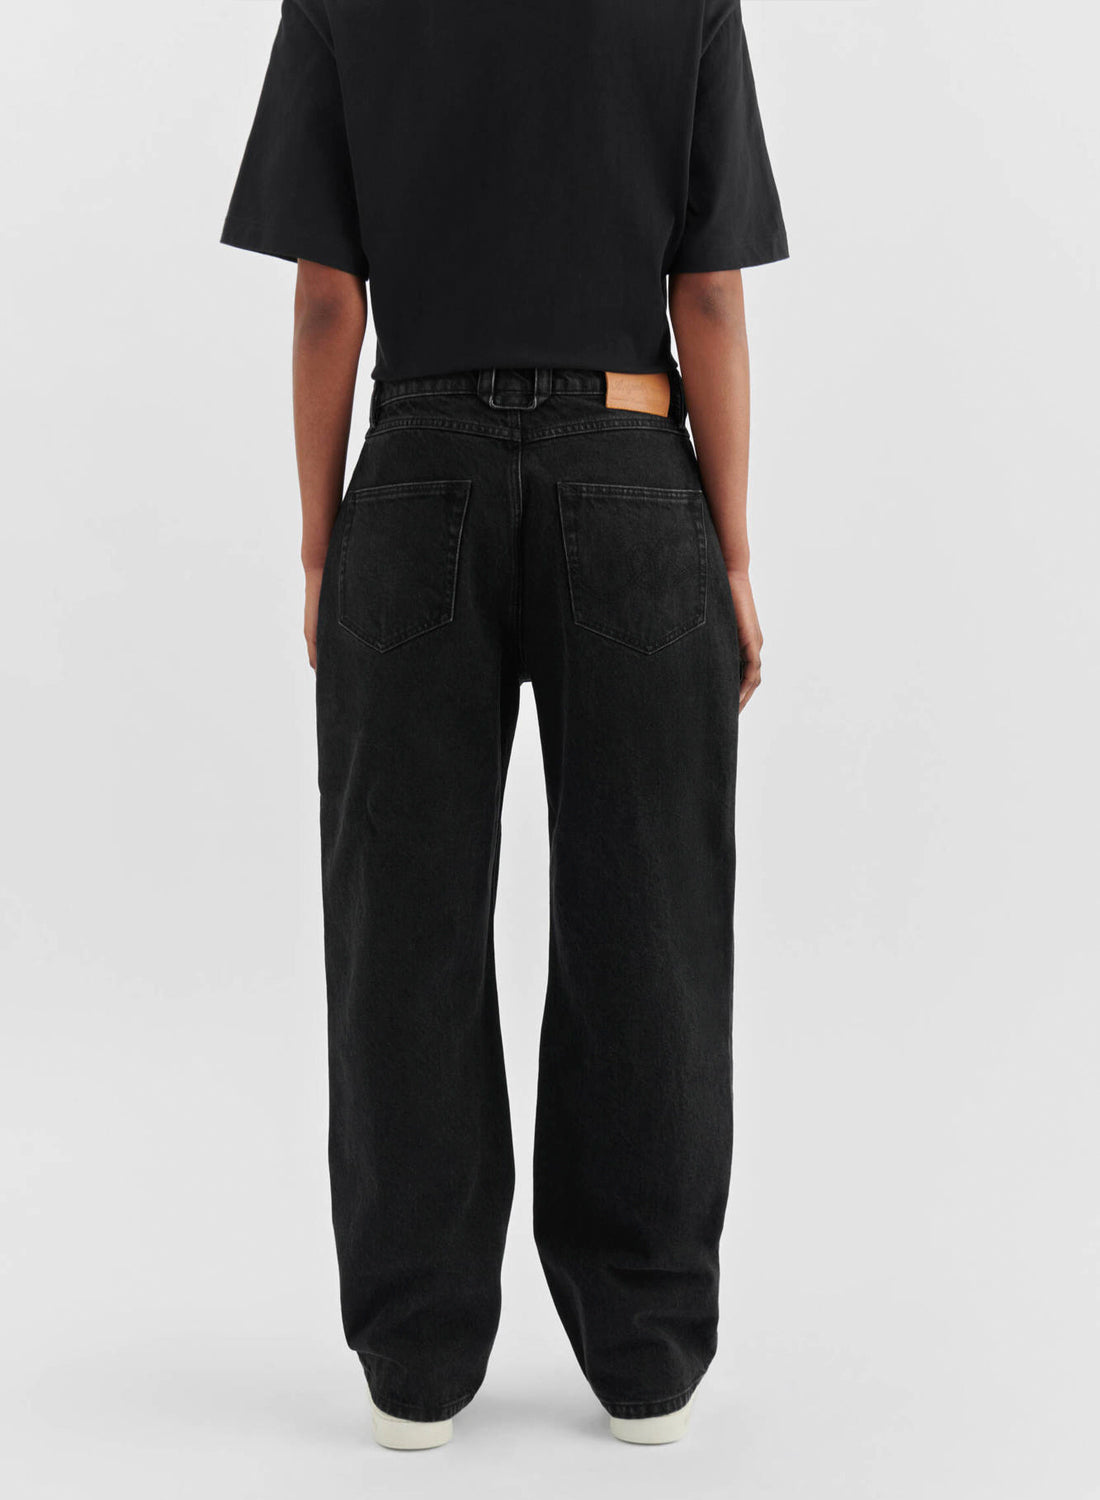 Axel Arigato Sly Mid-Rise Jeans Black